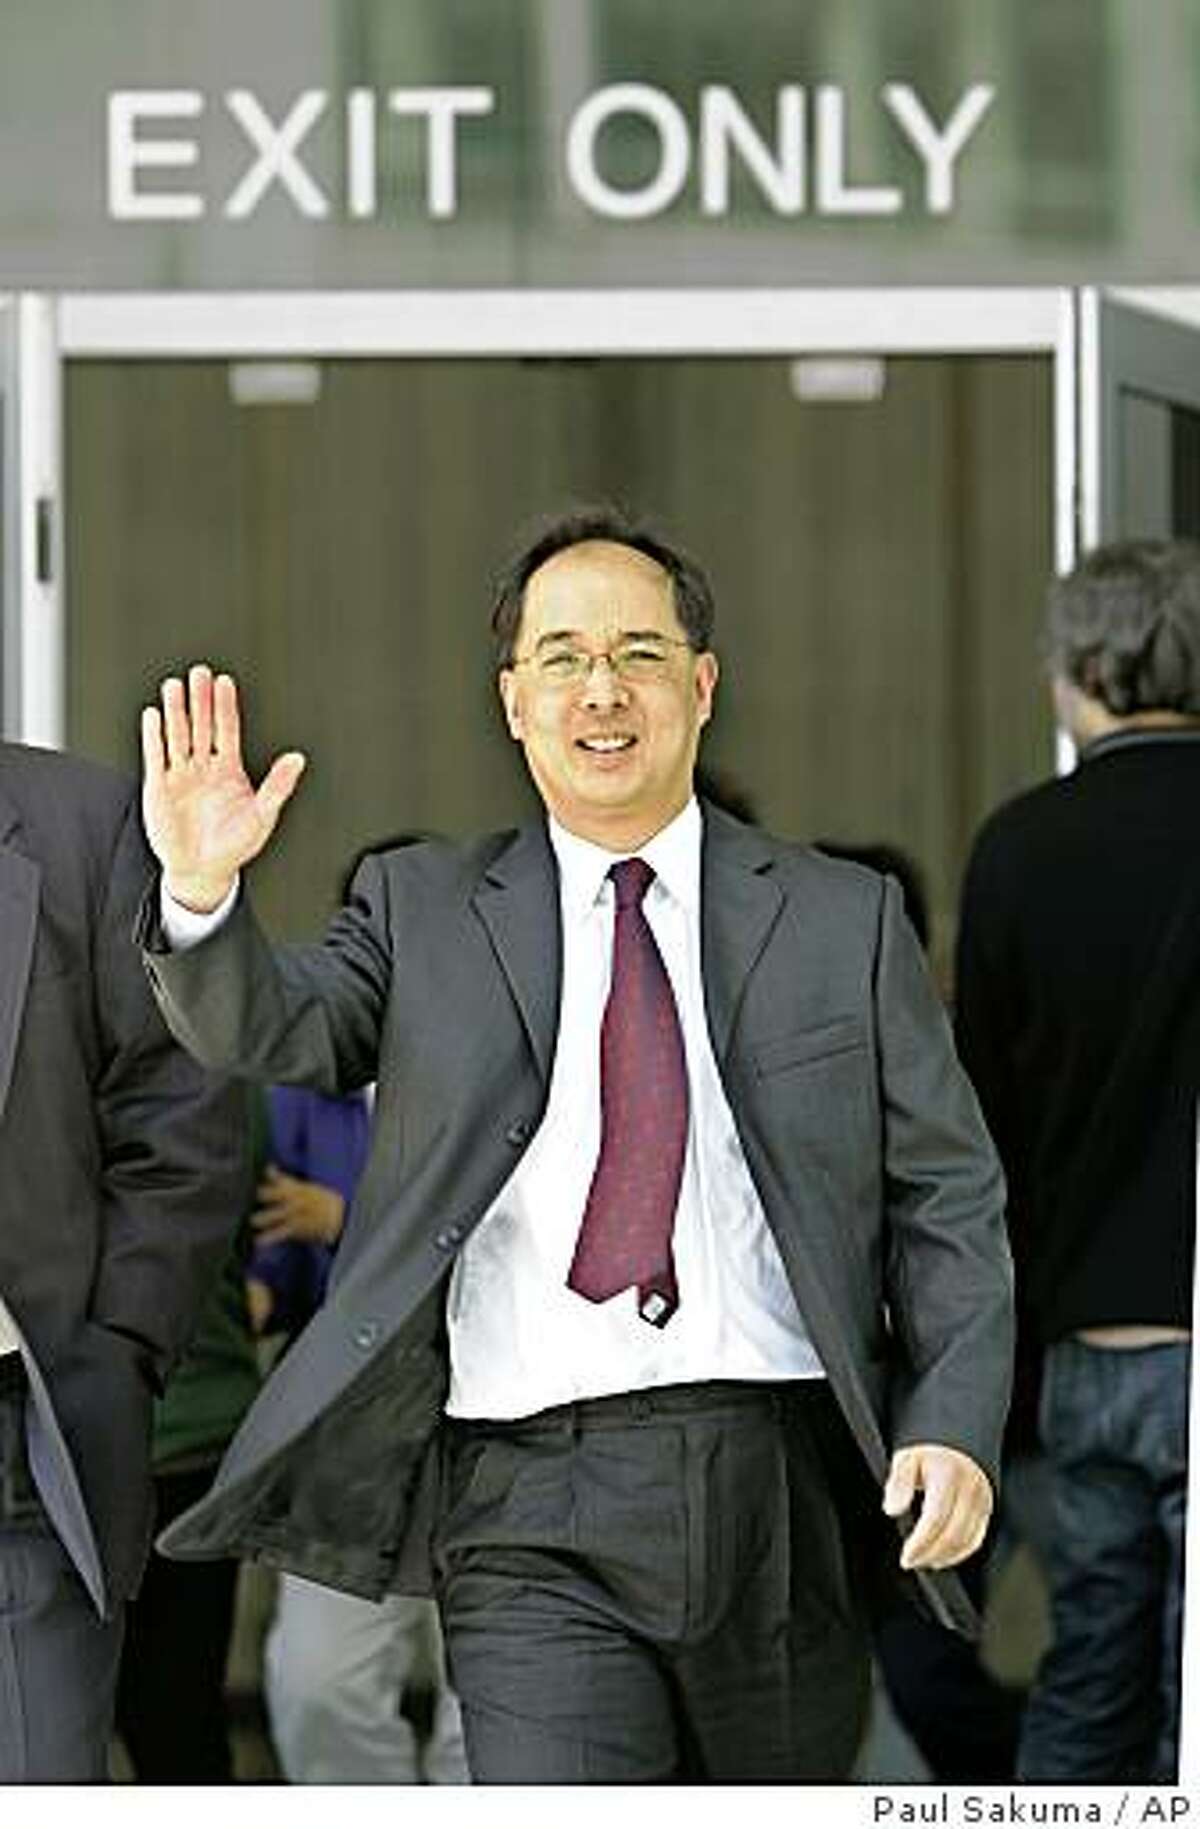 Former San Francisco Supervisor Ed Jew leaves a sentencing hearing at a federal courthouse in San Francisco, Friday, April 3, 2009. Jew has been sentenced to five years and four months in prison for attempting to shake down small city businesses having planning permit problems. He was ensnared in a 2007 FBI sting that videotaped Jew receiving $40,000 in marked bills from an owner of a Quickly fast-food restaurant. He later pleaded guilty to one count each of bribery, extortion and fraud and admitted he tried to force several Quickly owners to pay him a combined $80,000. (AP Photo/Paul Sakuma)